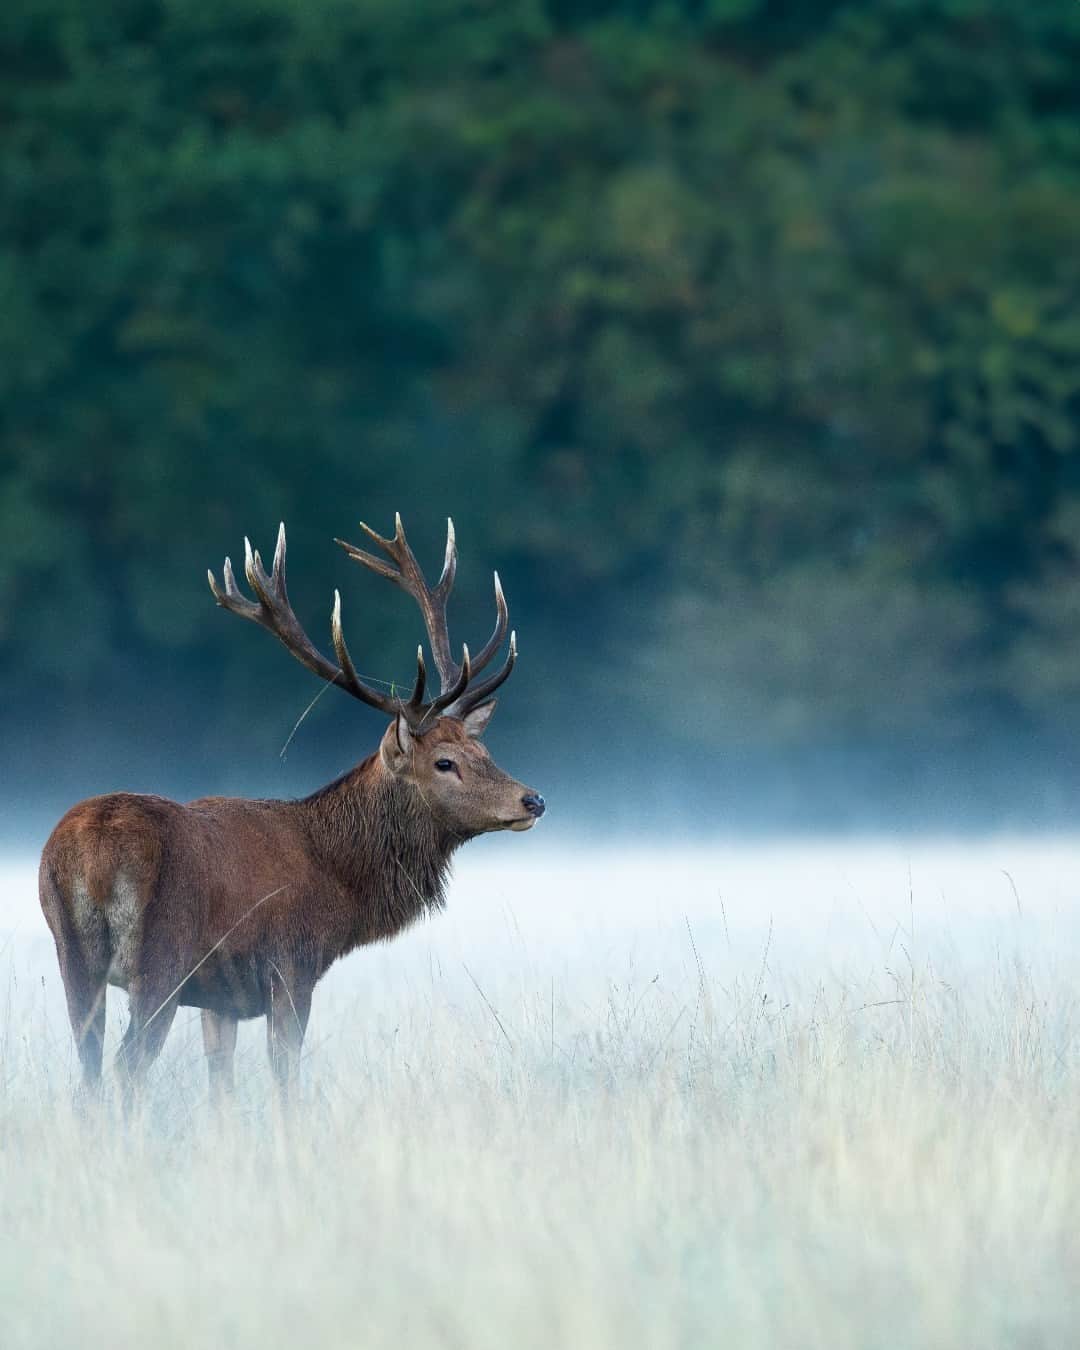 Canon UKのインスタグラム：「Your deer Images are truly captivating 🦌 📷  For a chance to be featured on our channel don’t forget to tag us and use #CanonUK in your amazing shots.   Image 1: 📷 by @Settysphotography   Camera: EOS-1D X Mark II  Lens: EF 500mm f/4L IS II USM Shutter Speed: 1/320, Aperture: f/5.6, ISO 5000  Image 2: 📷 by @aden_howard  Camera: EOS R5 Lens: EF 100-400mm f4.5-5.6L IS II USM using the EF/RF adapter Shutter Speed: 1/320, Aperture: f/5.6, ISO 1600  Image 3: 📷 by @fbimages  Camera: EOS R5 Lens: RF 28-70mm F2L USM  Shutter Speed: 1/400, Aperture: f/2, ISO 100   #canonuk #mycanon #canon_photography」